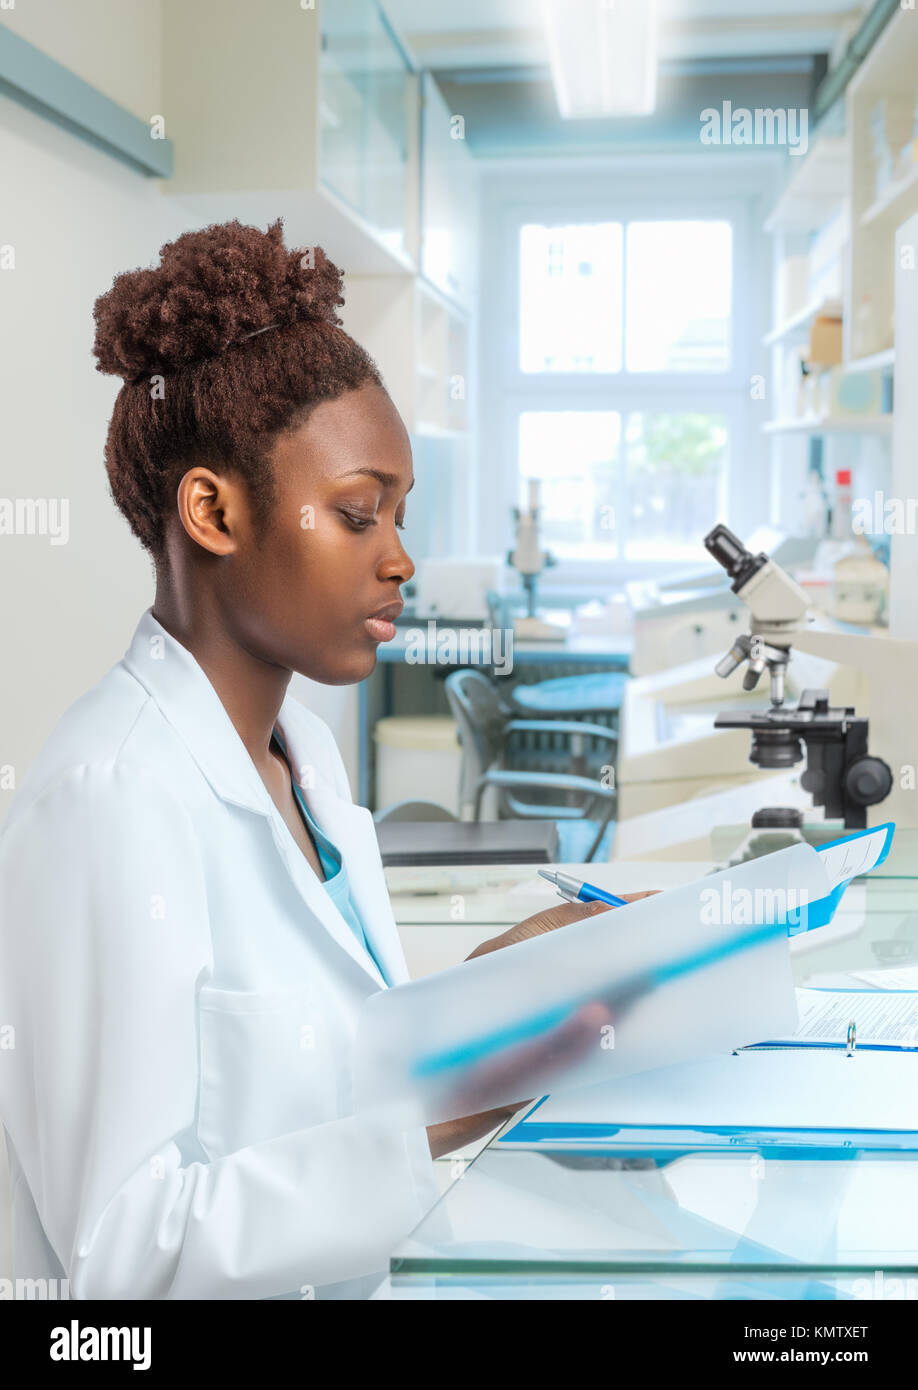 African scientist, medical worker, tech or graduate student works in modern biological laboratory Stock Photo